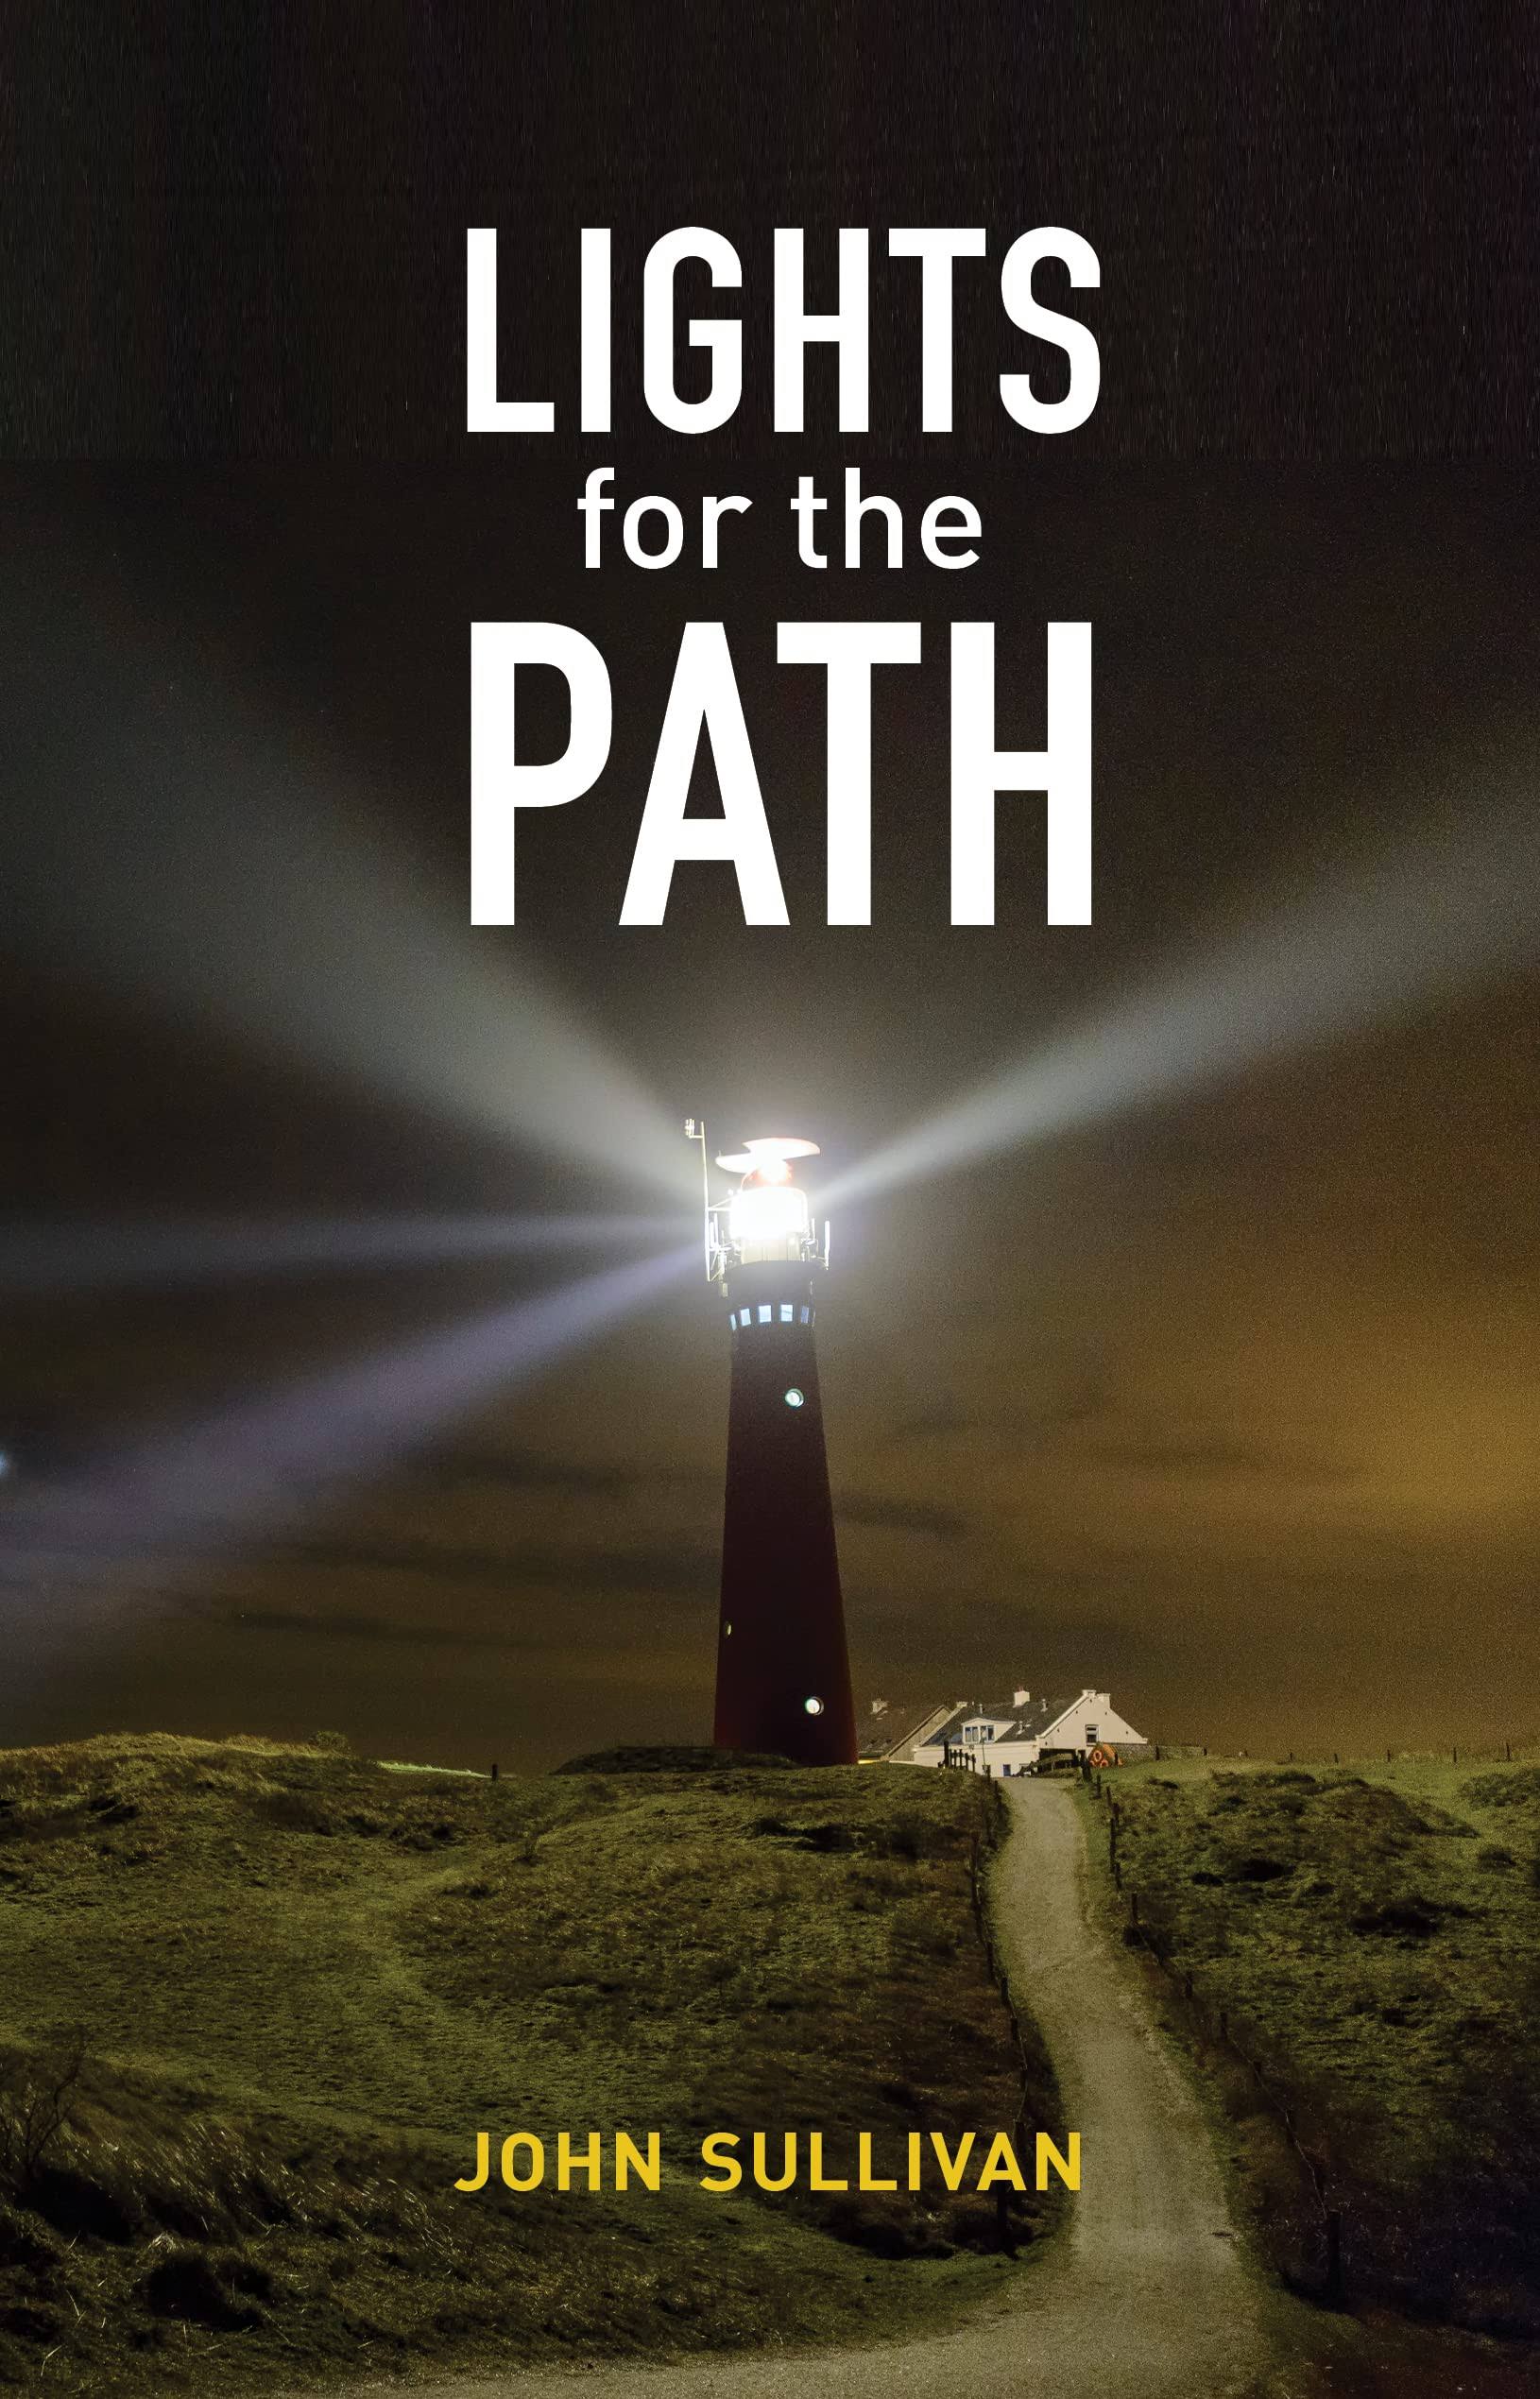 Lights for the path